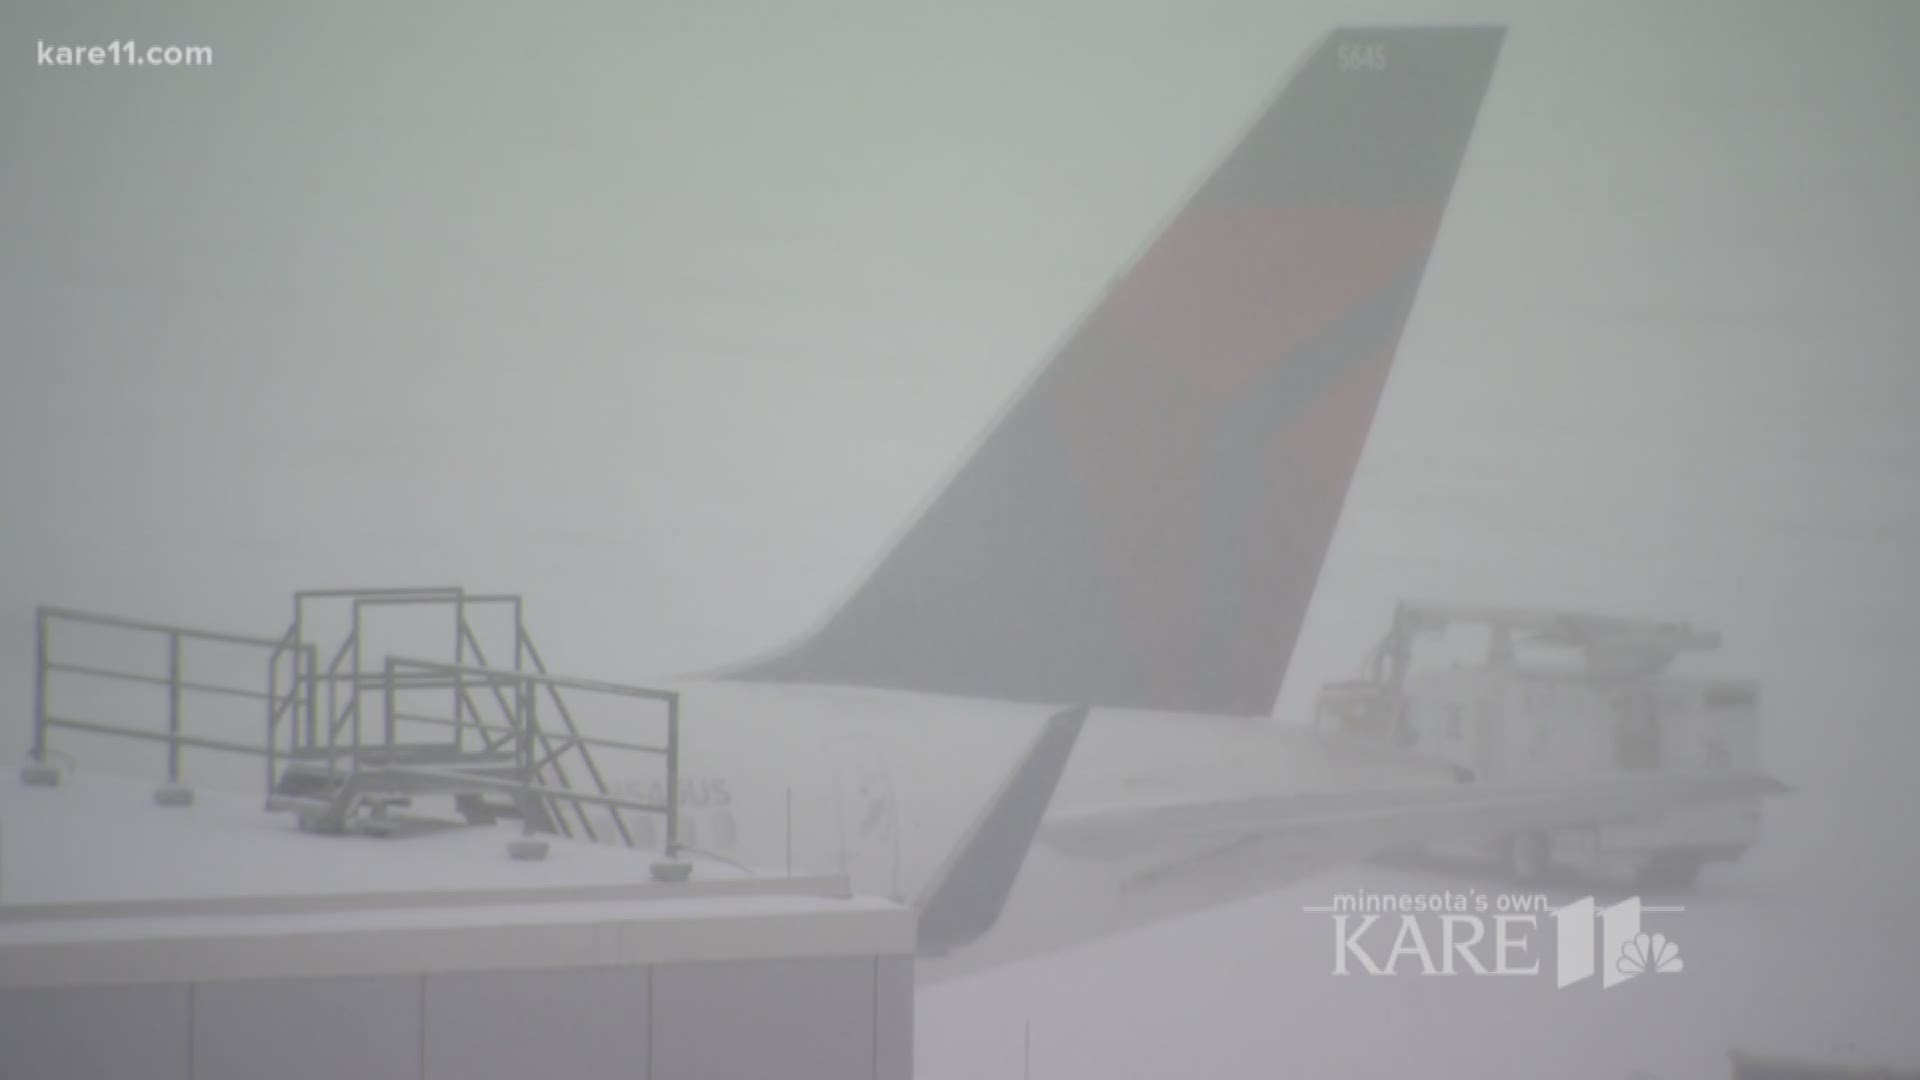 April blizzard grounds flights at MSP Airport